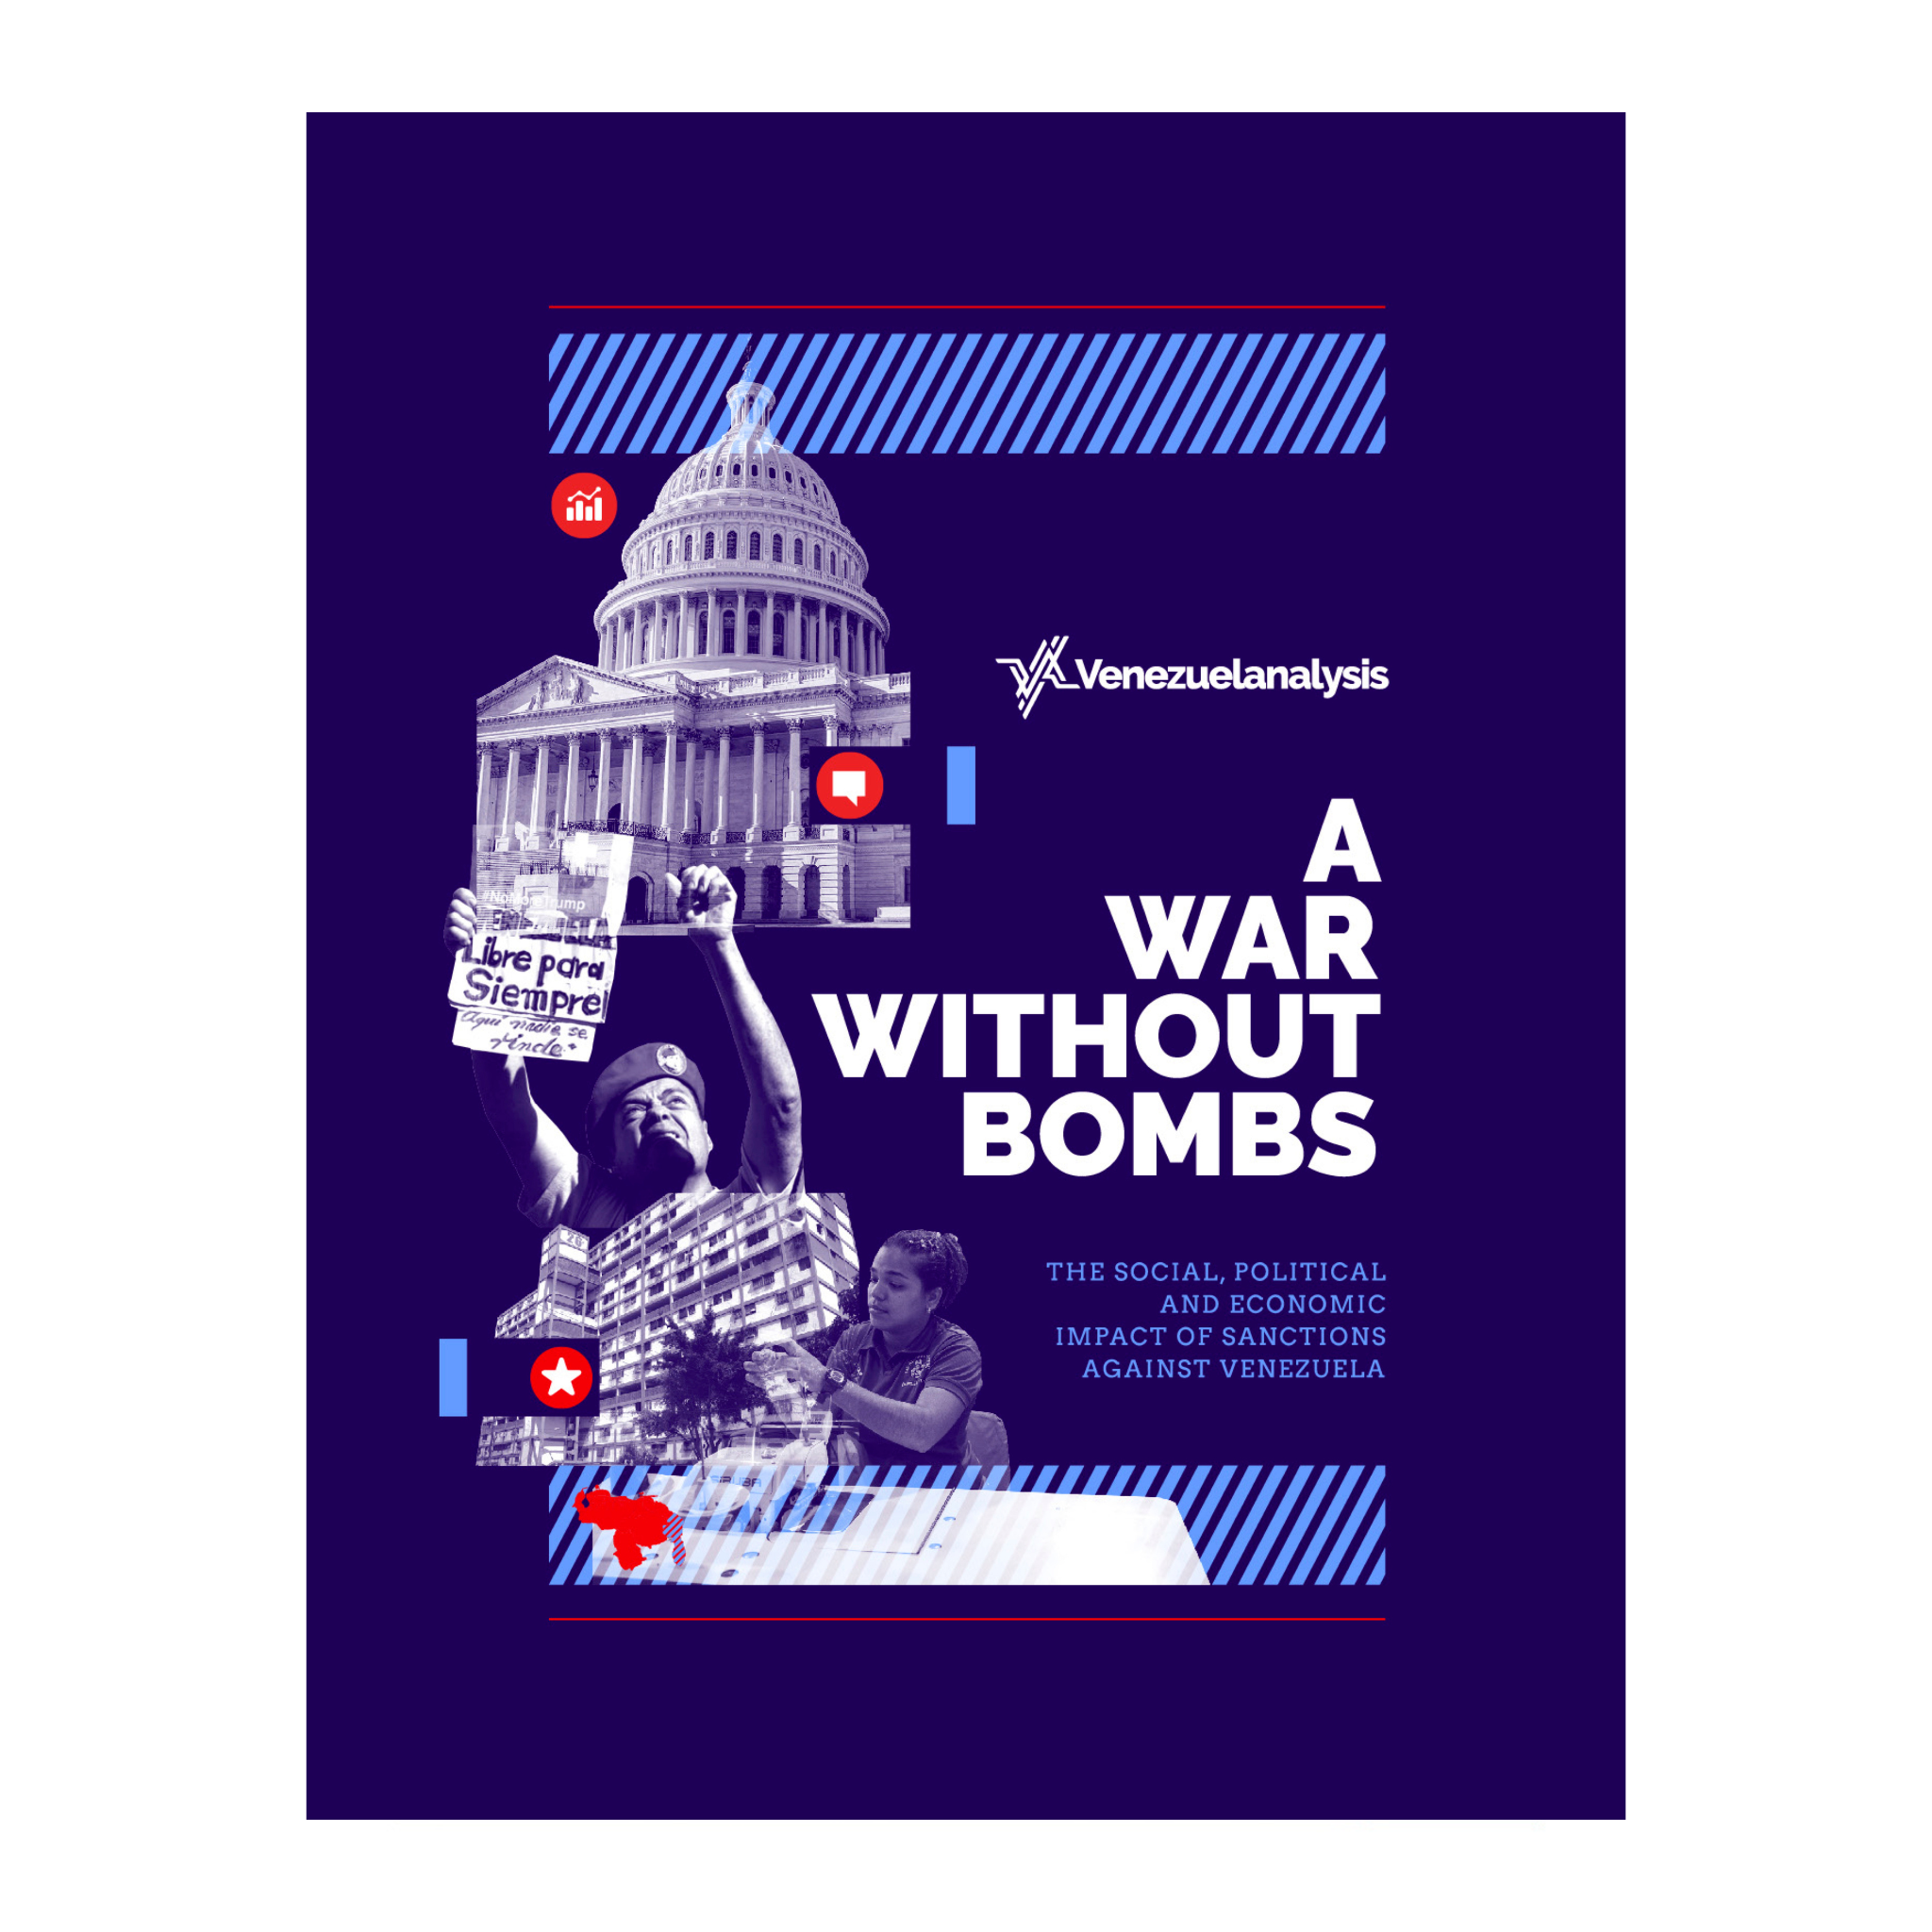 A War Without Bombs: The Social, Political and Economic Impact of Sanctions Against Venezuela